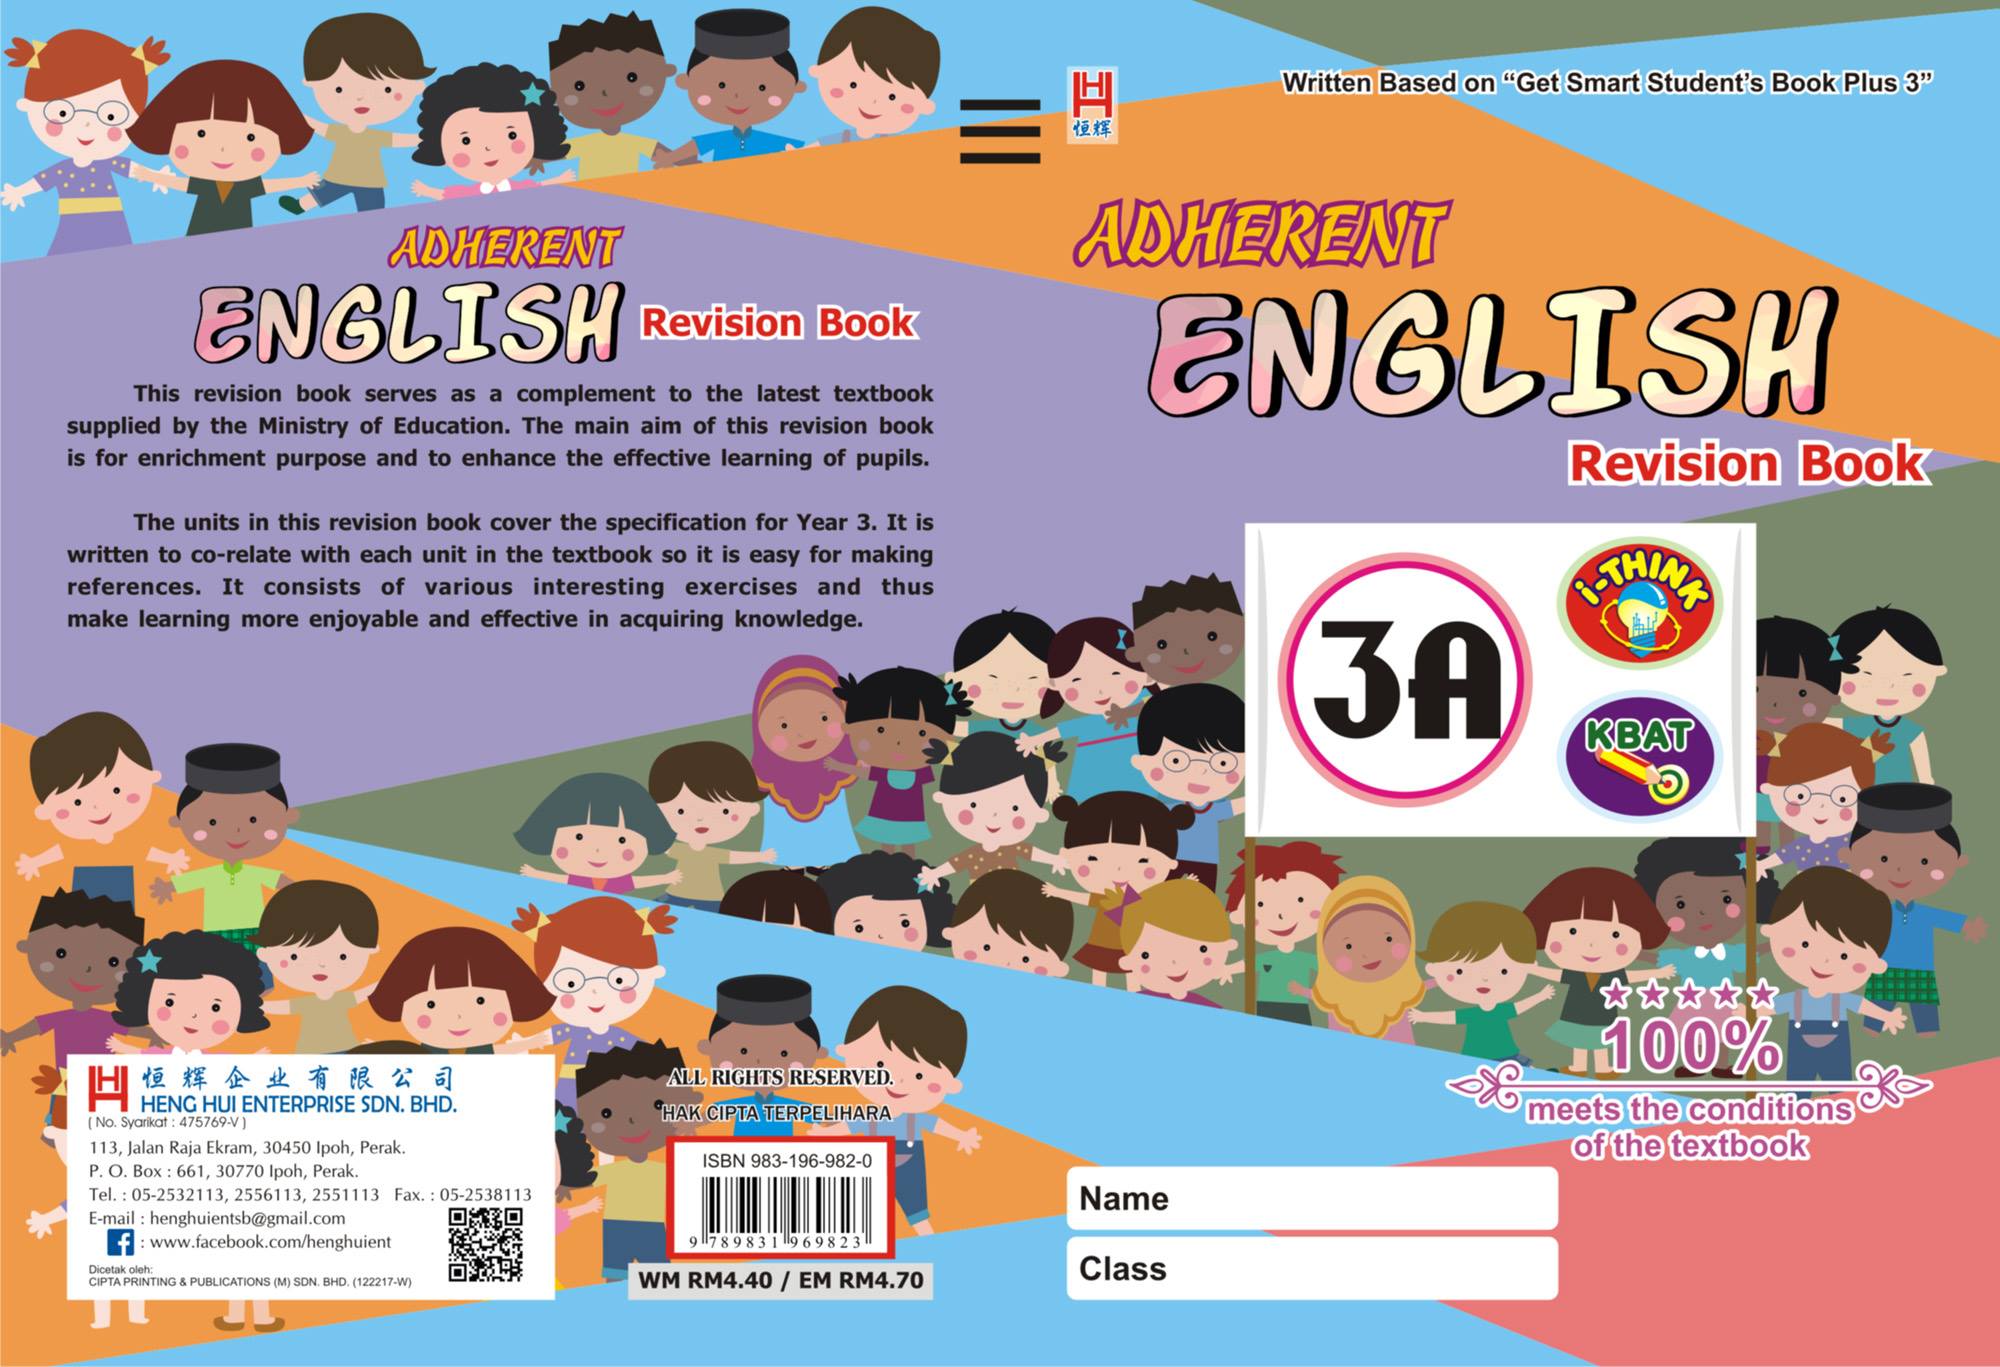 ADHERENT ENGLISH REVISION BOOK 3A – MA-TU | BOOKSELLER SINCE 1959